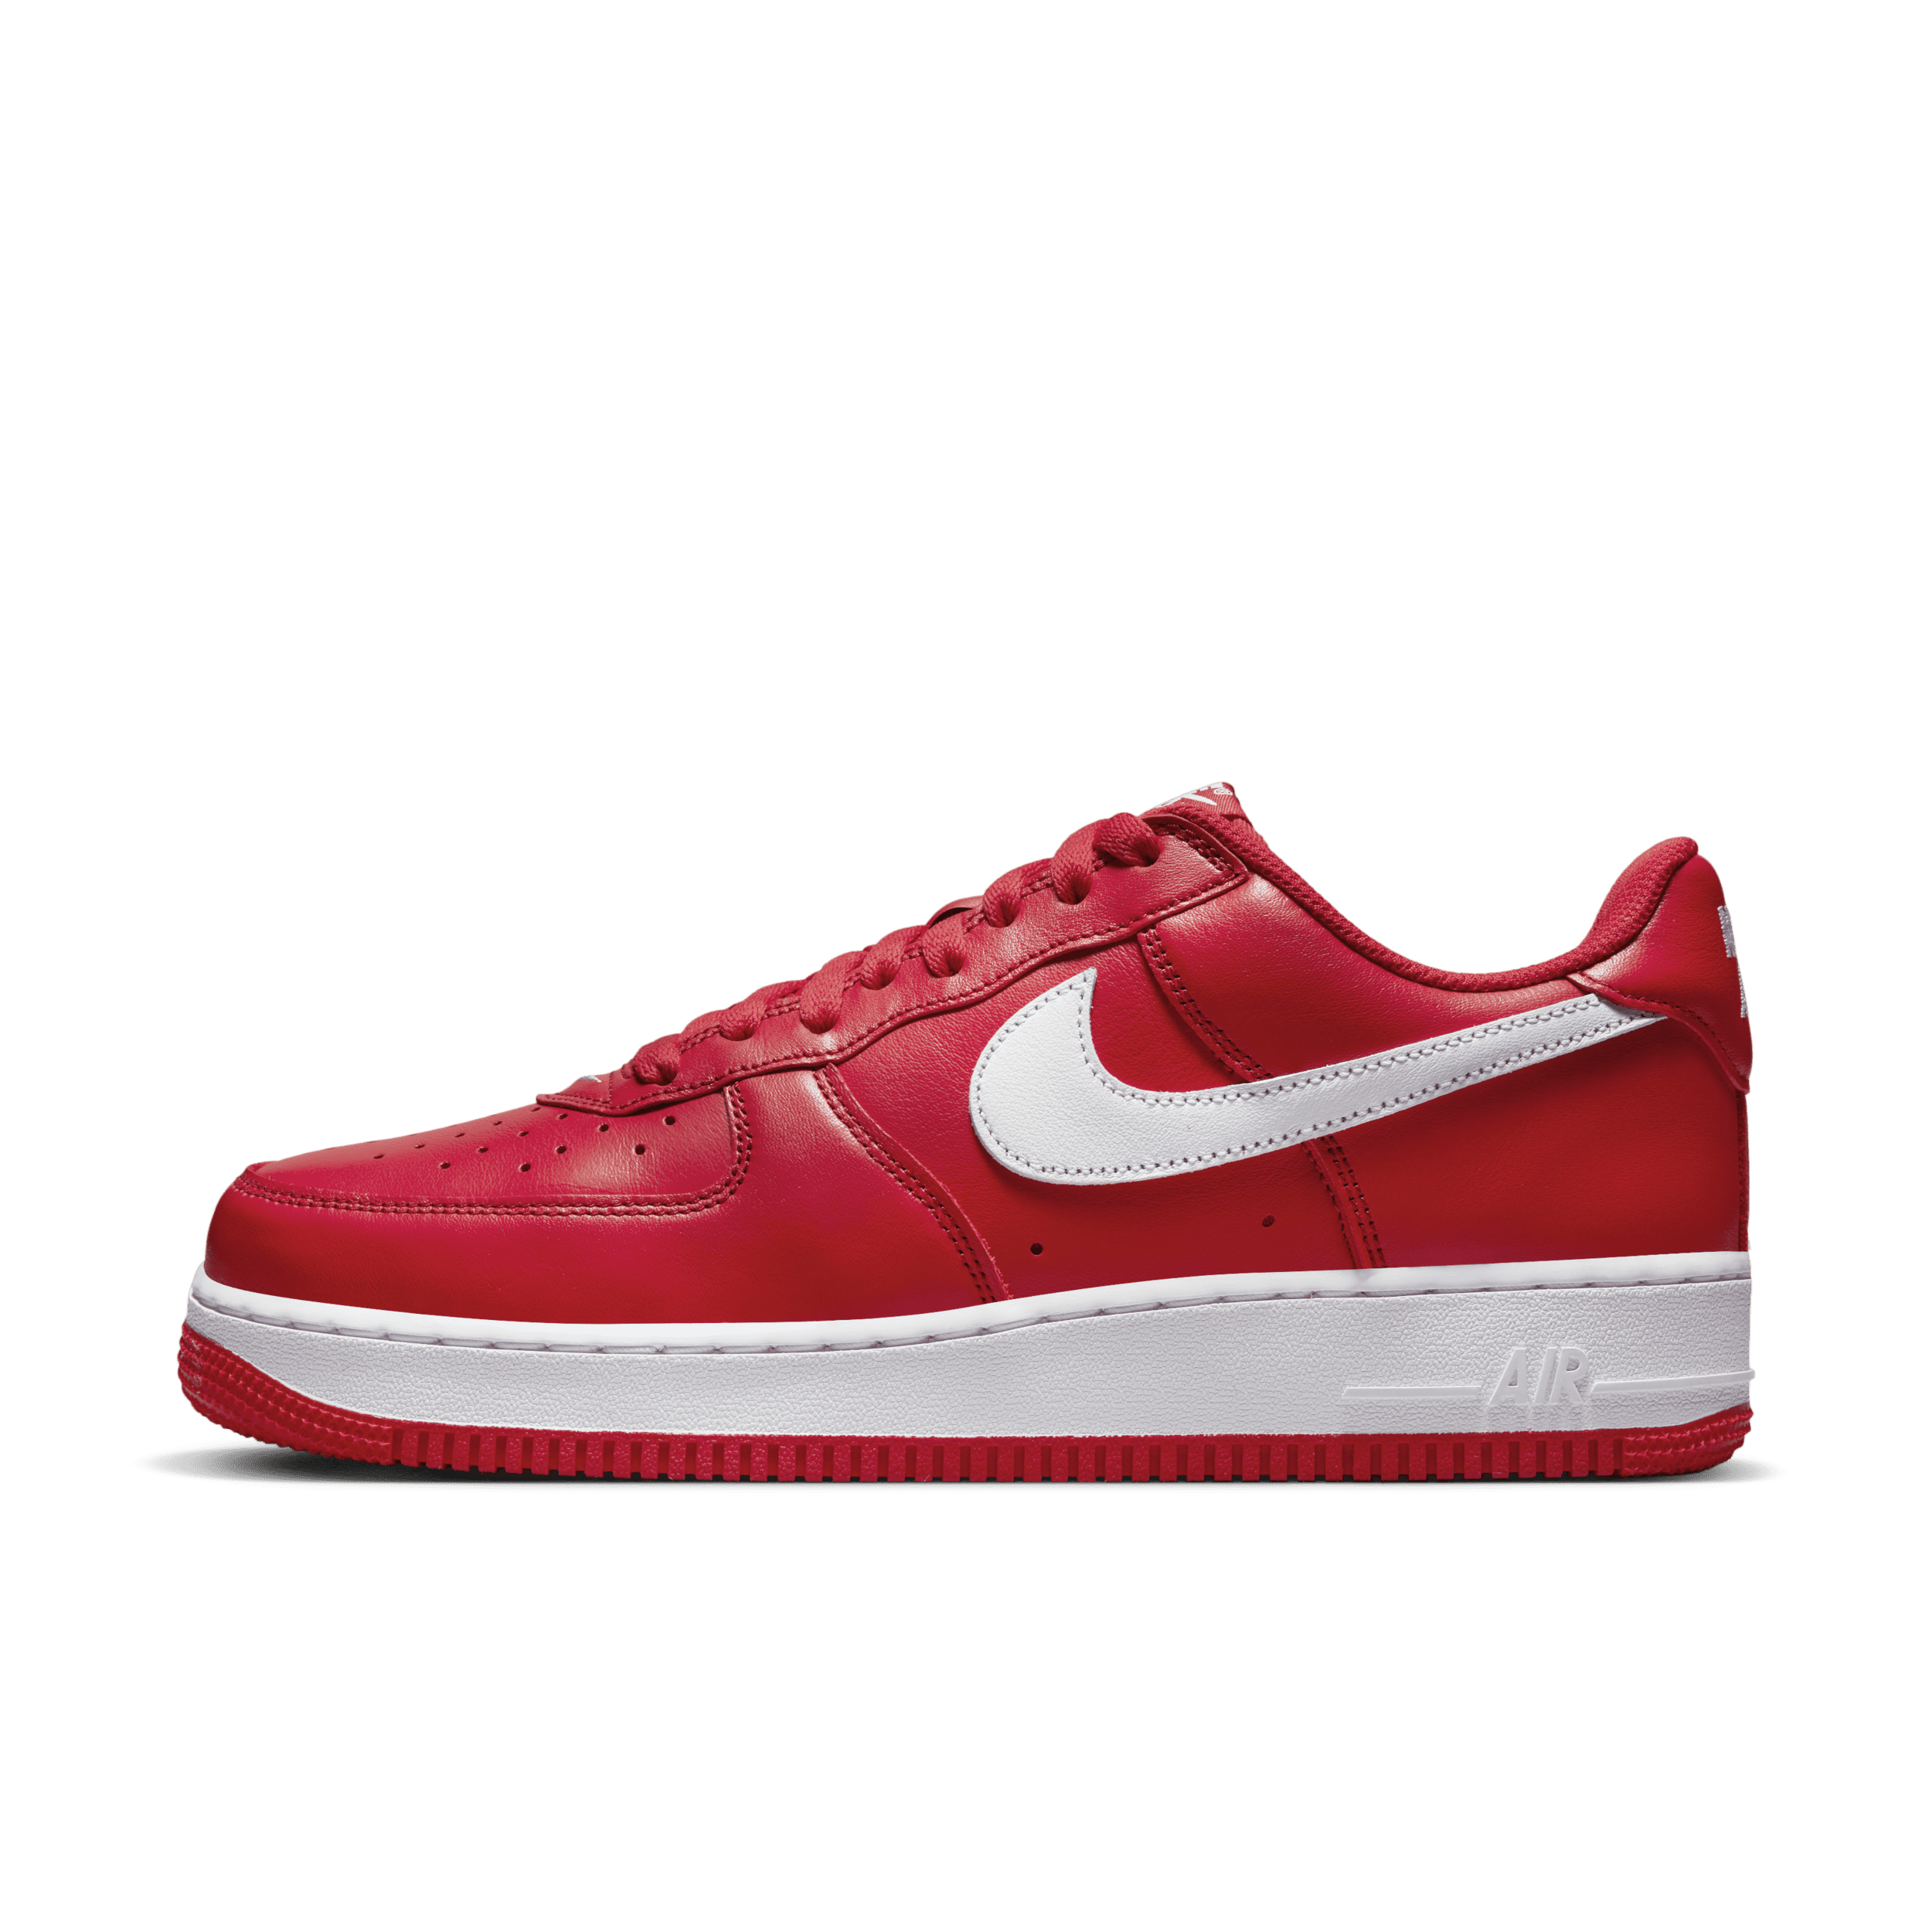 Nike Air Force 1 Low Retro Herenschoenen – Rood